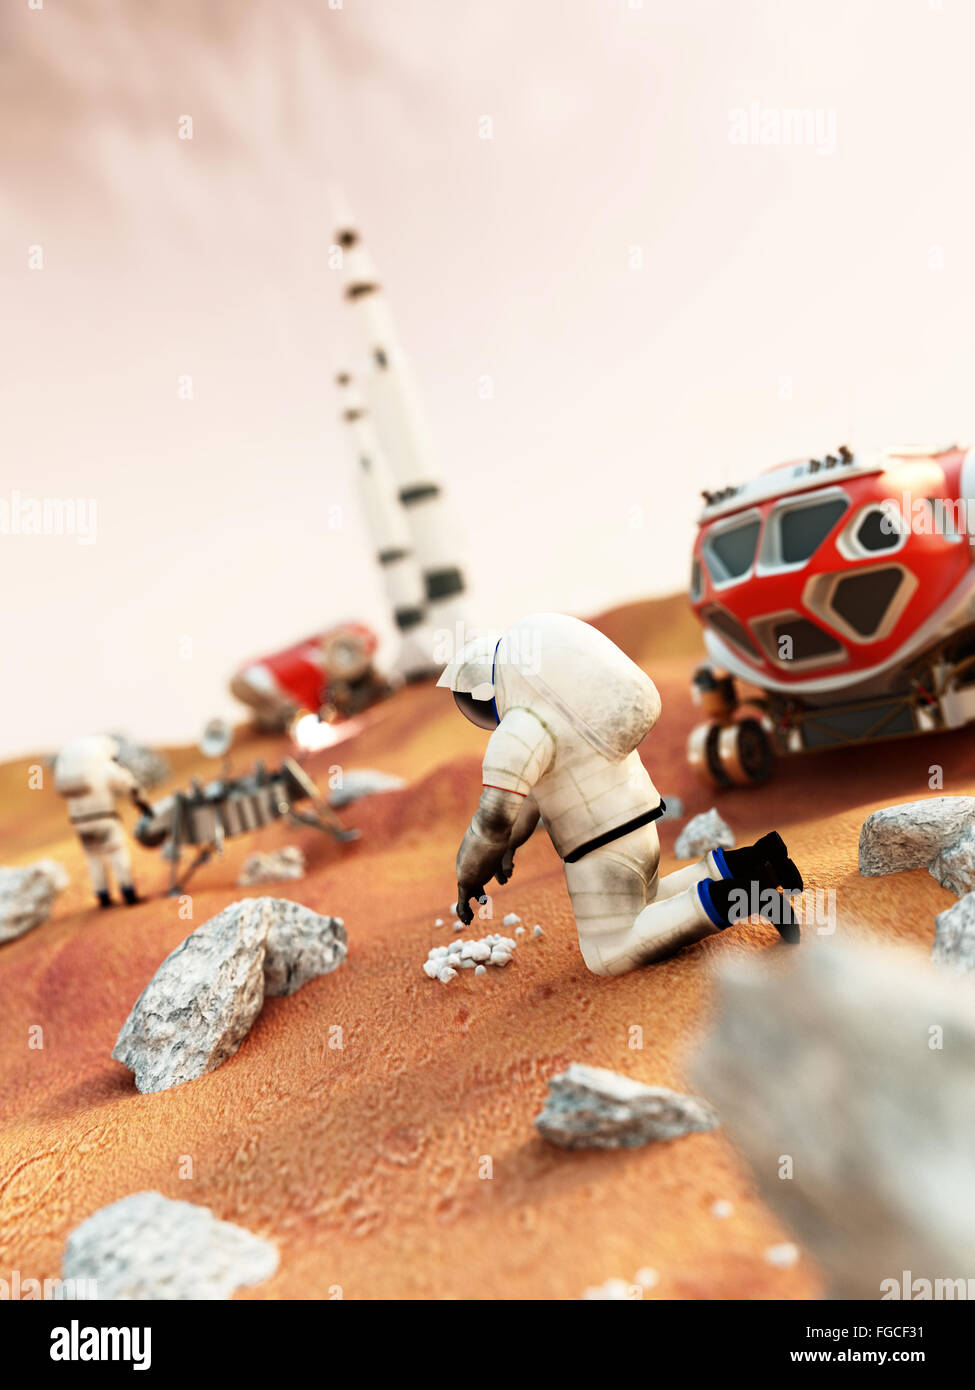 Fictitious scene including vehicles and astronauts depicts manned Mars mission Stock Photo